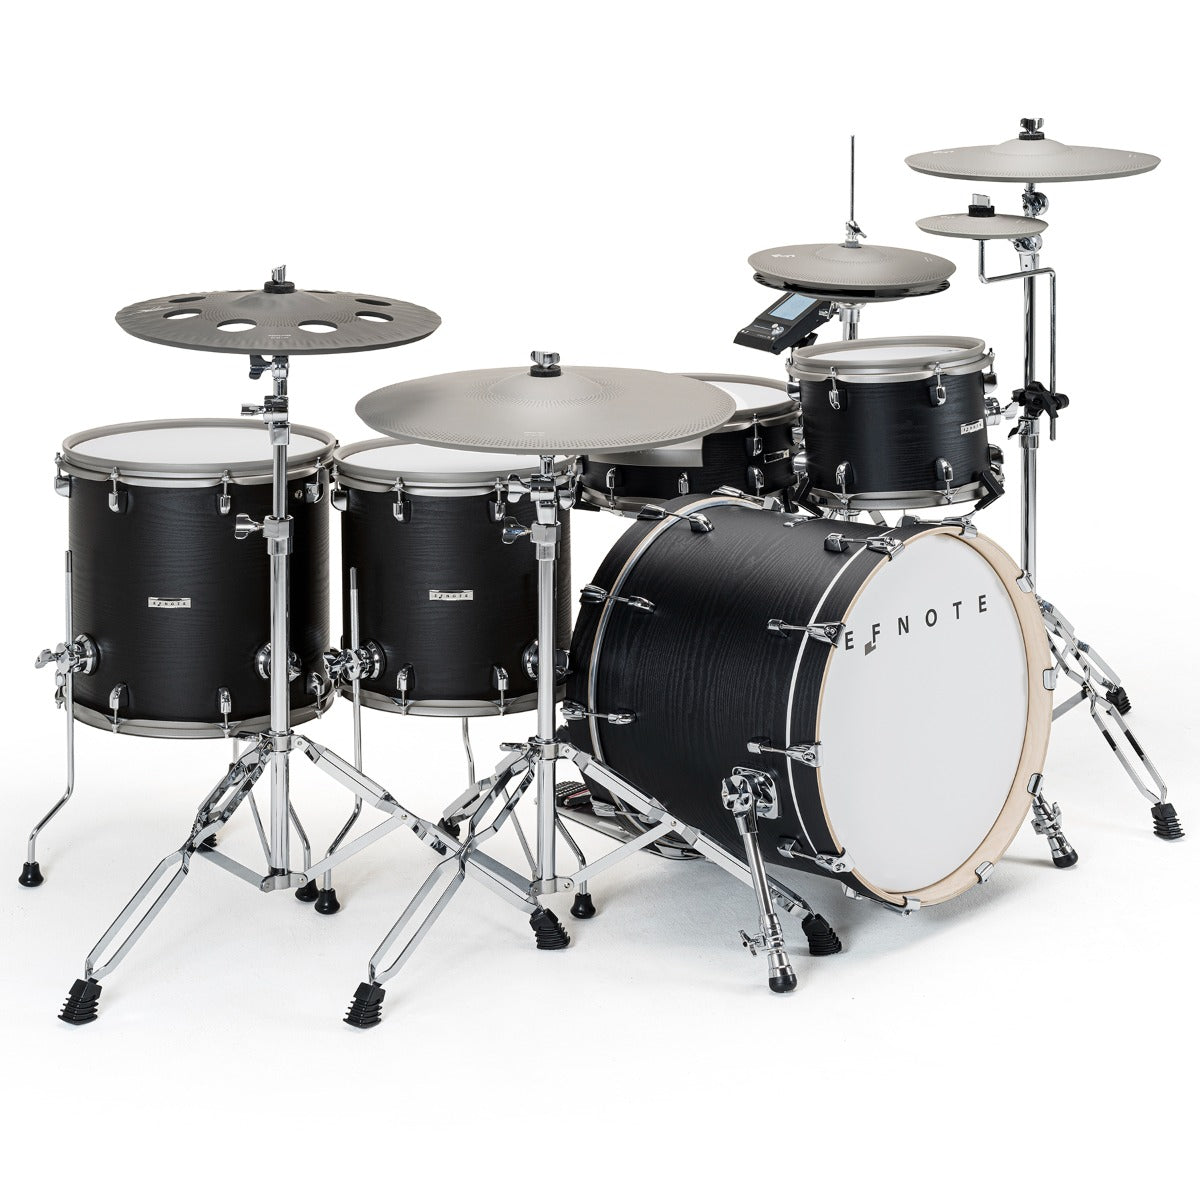 EFNOTE 7X Electronic Drum Set view 3